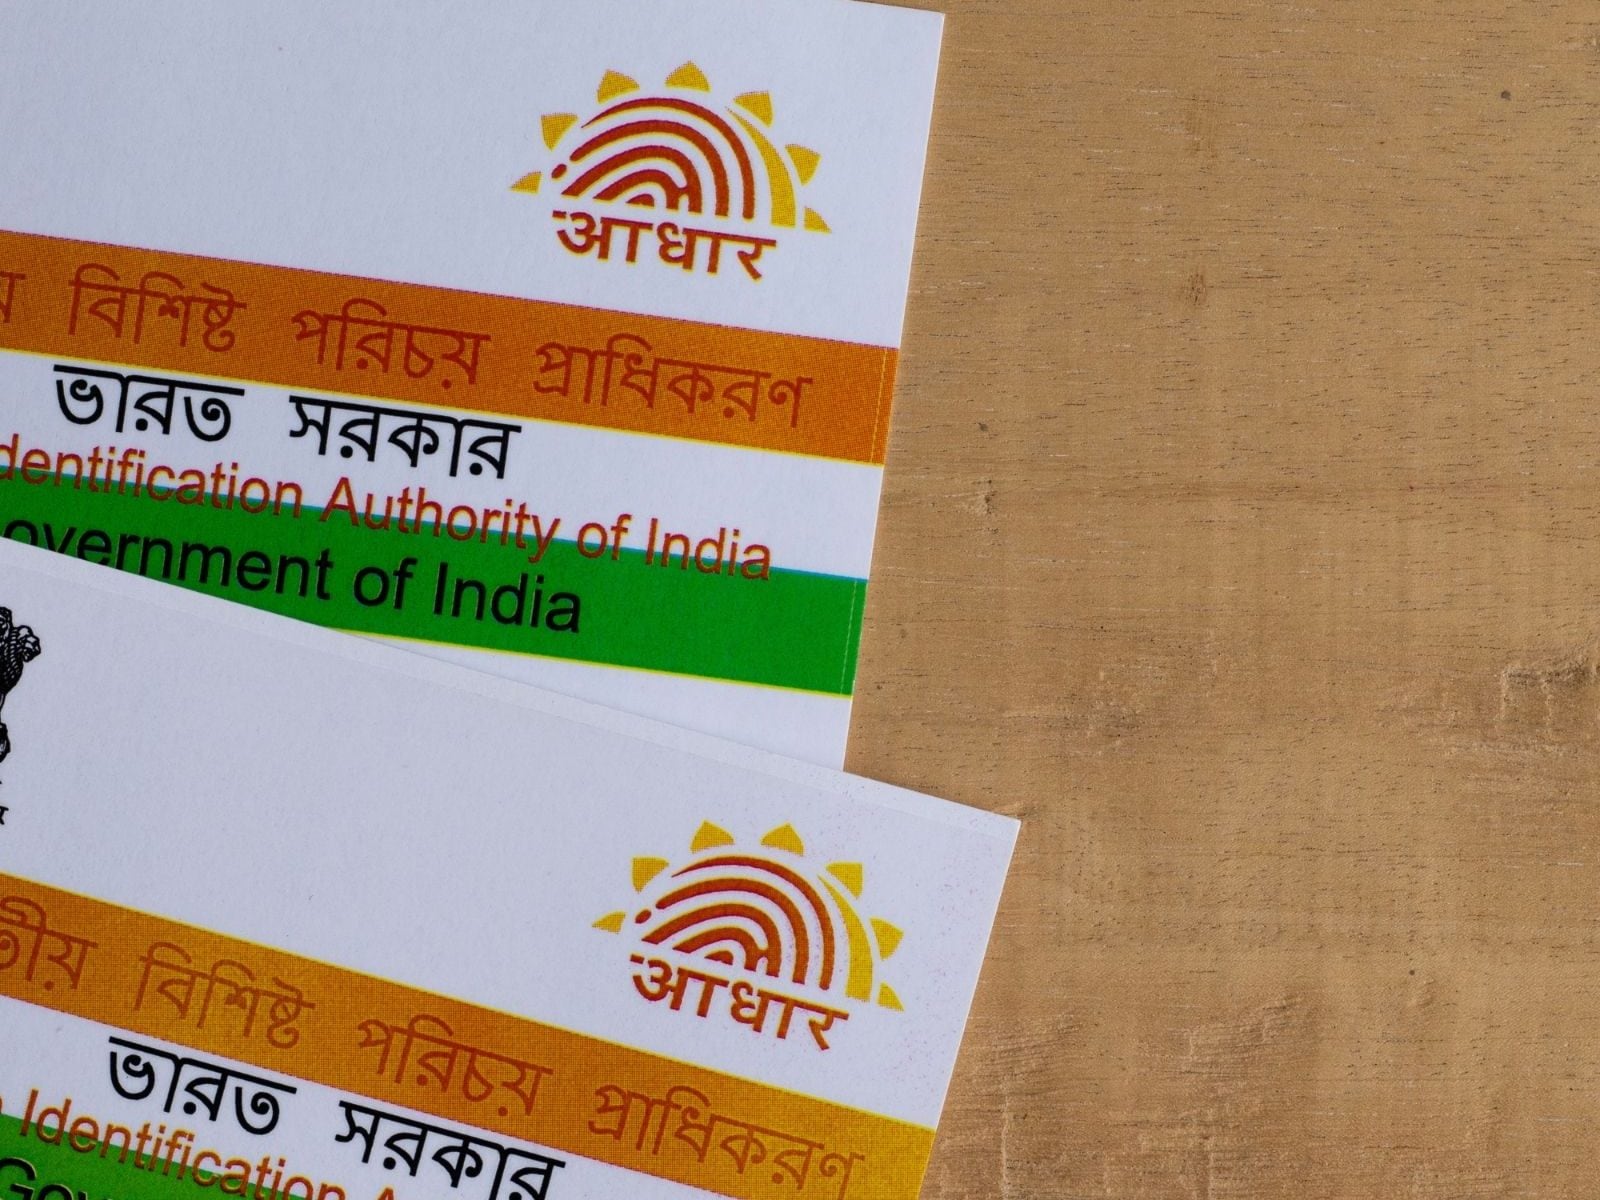 Explained: You and your Aadhaar | Explained News - The Indian Express